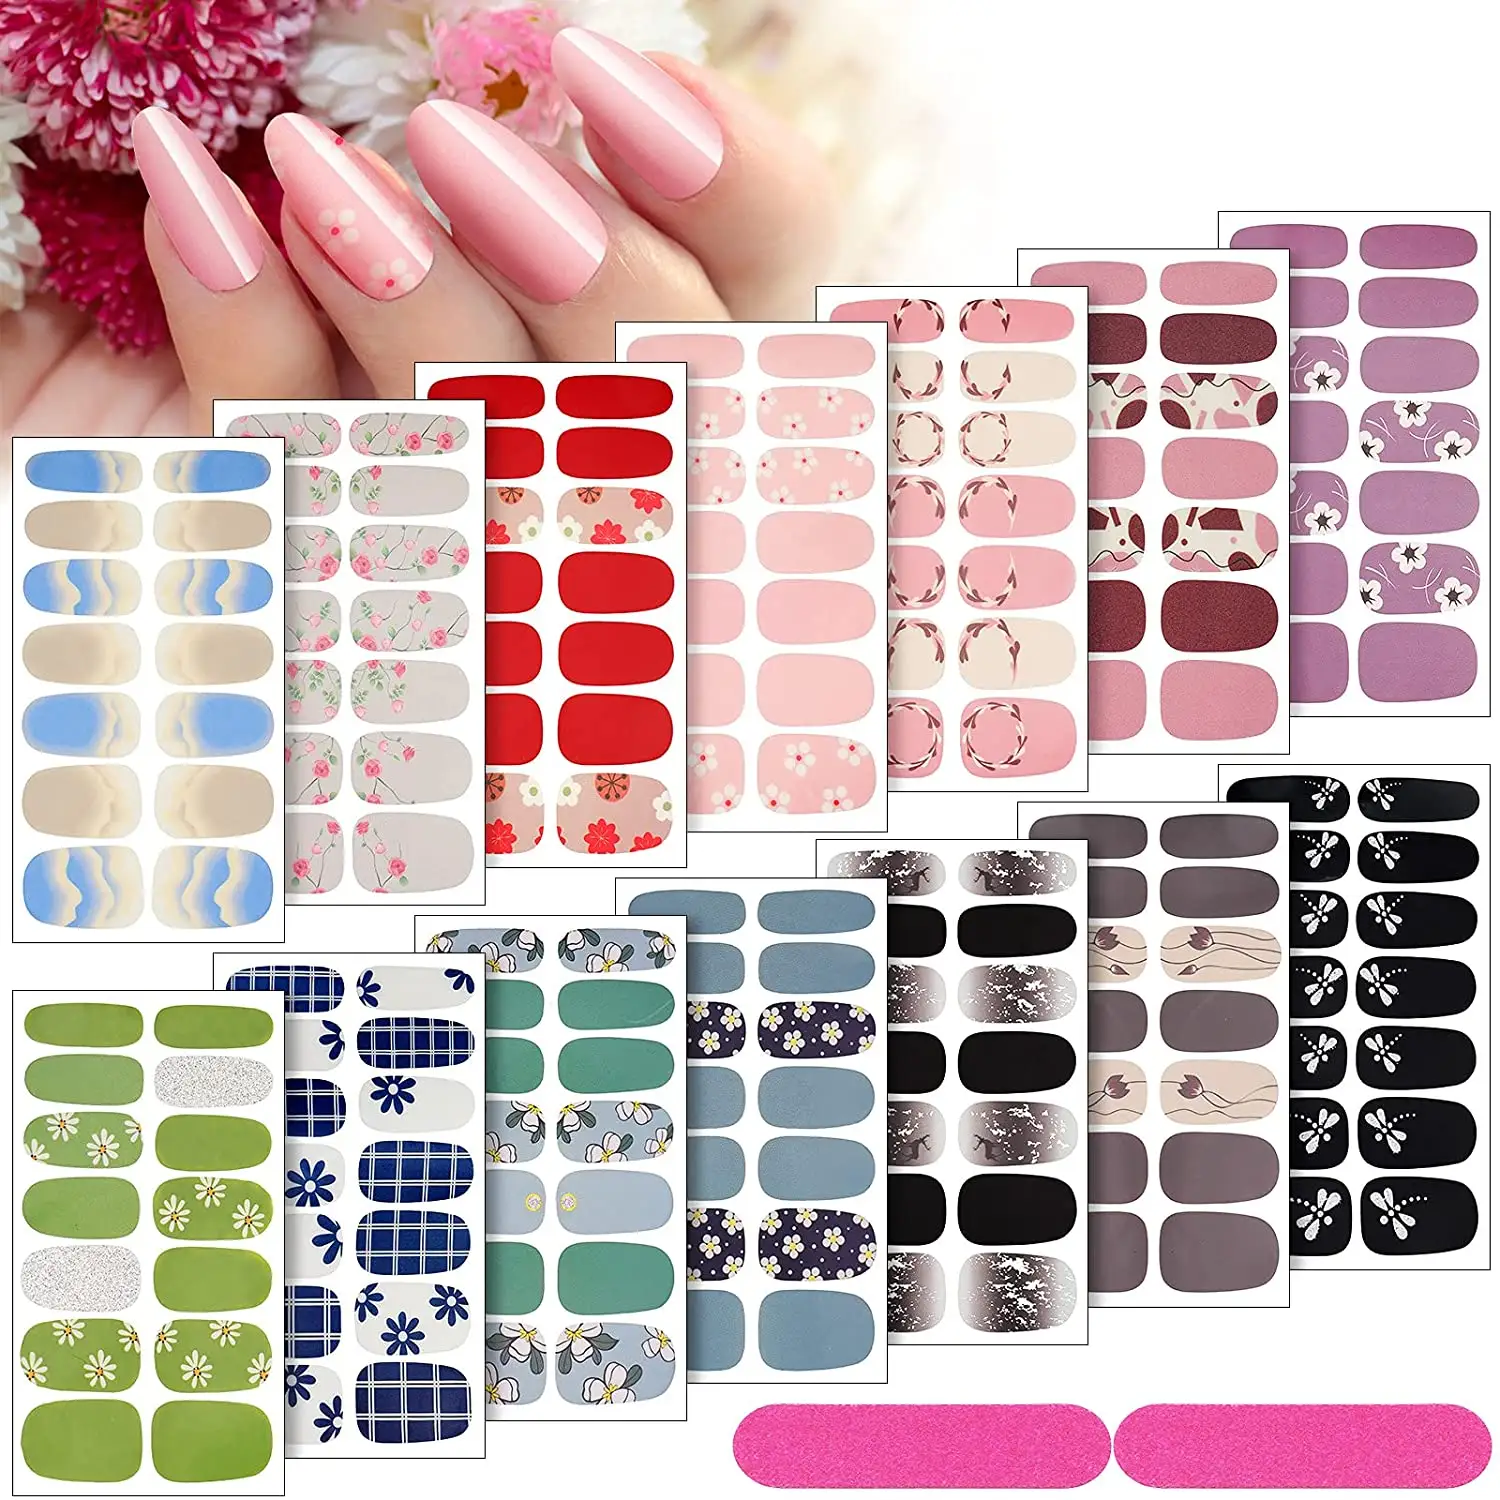 Factory Hotsale Online Custom Factory Fashion Colorful 14 tips Full Polish Nail Stickers in 3 Minutes To Complete The Paste